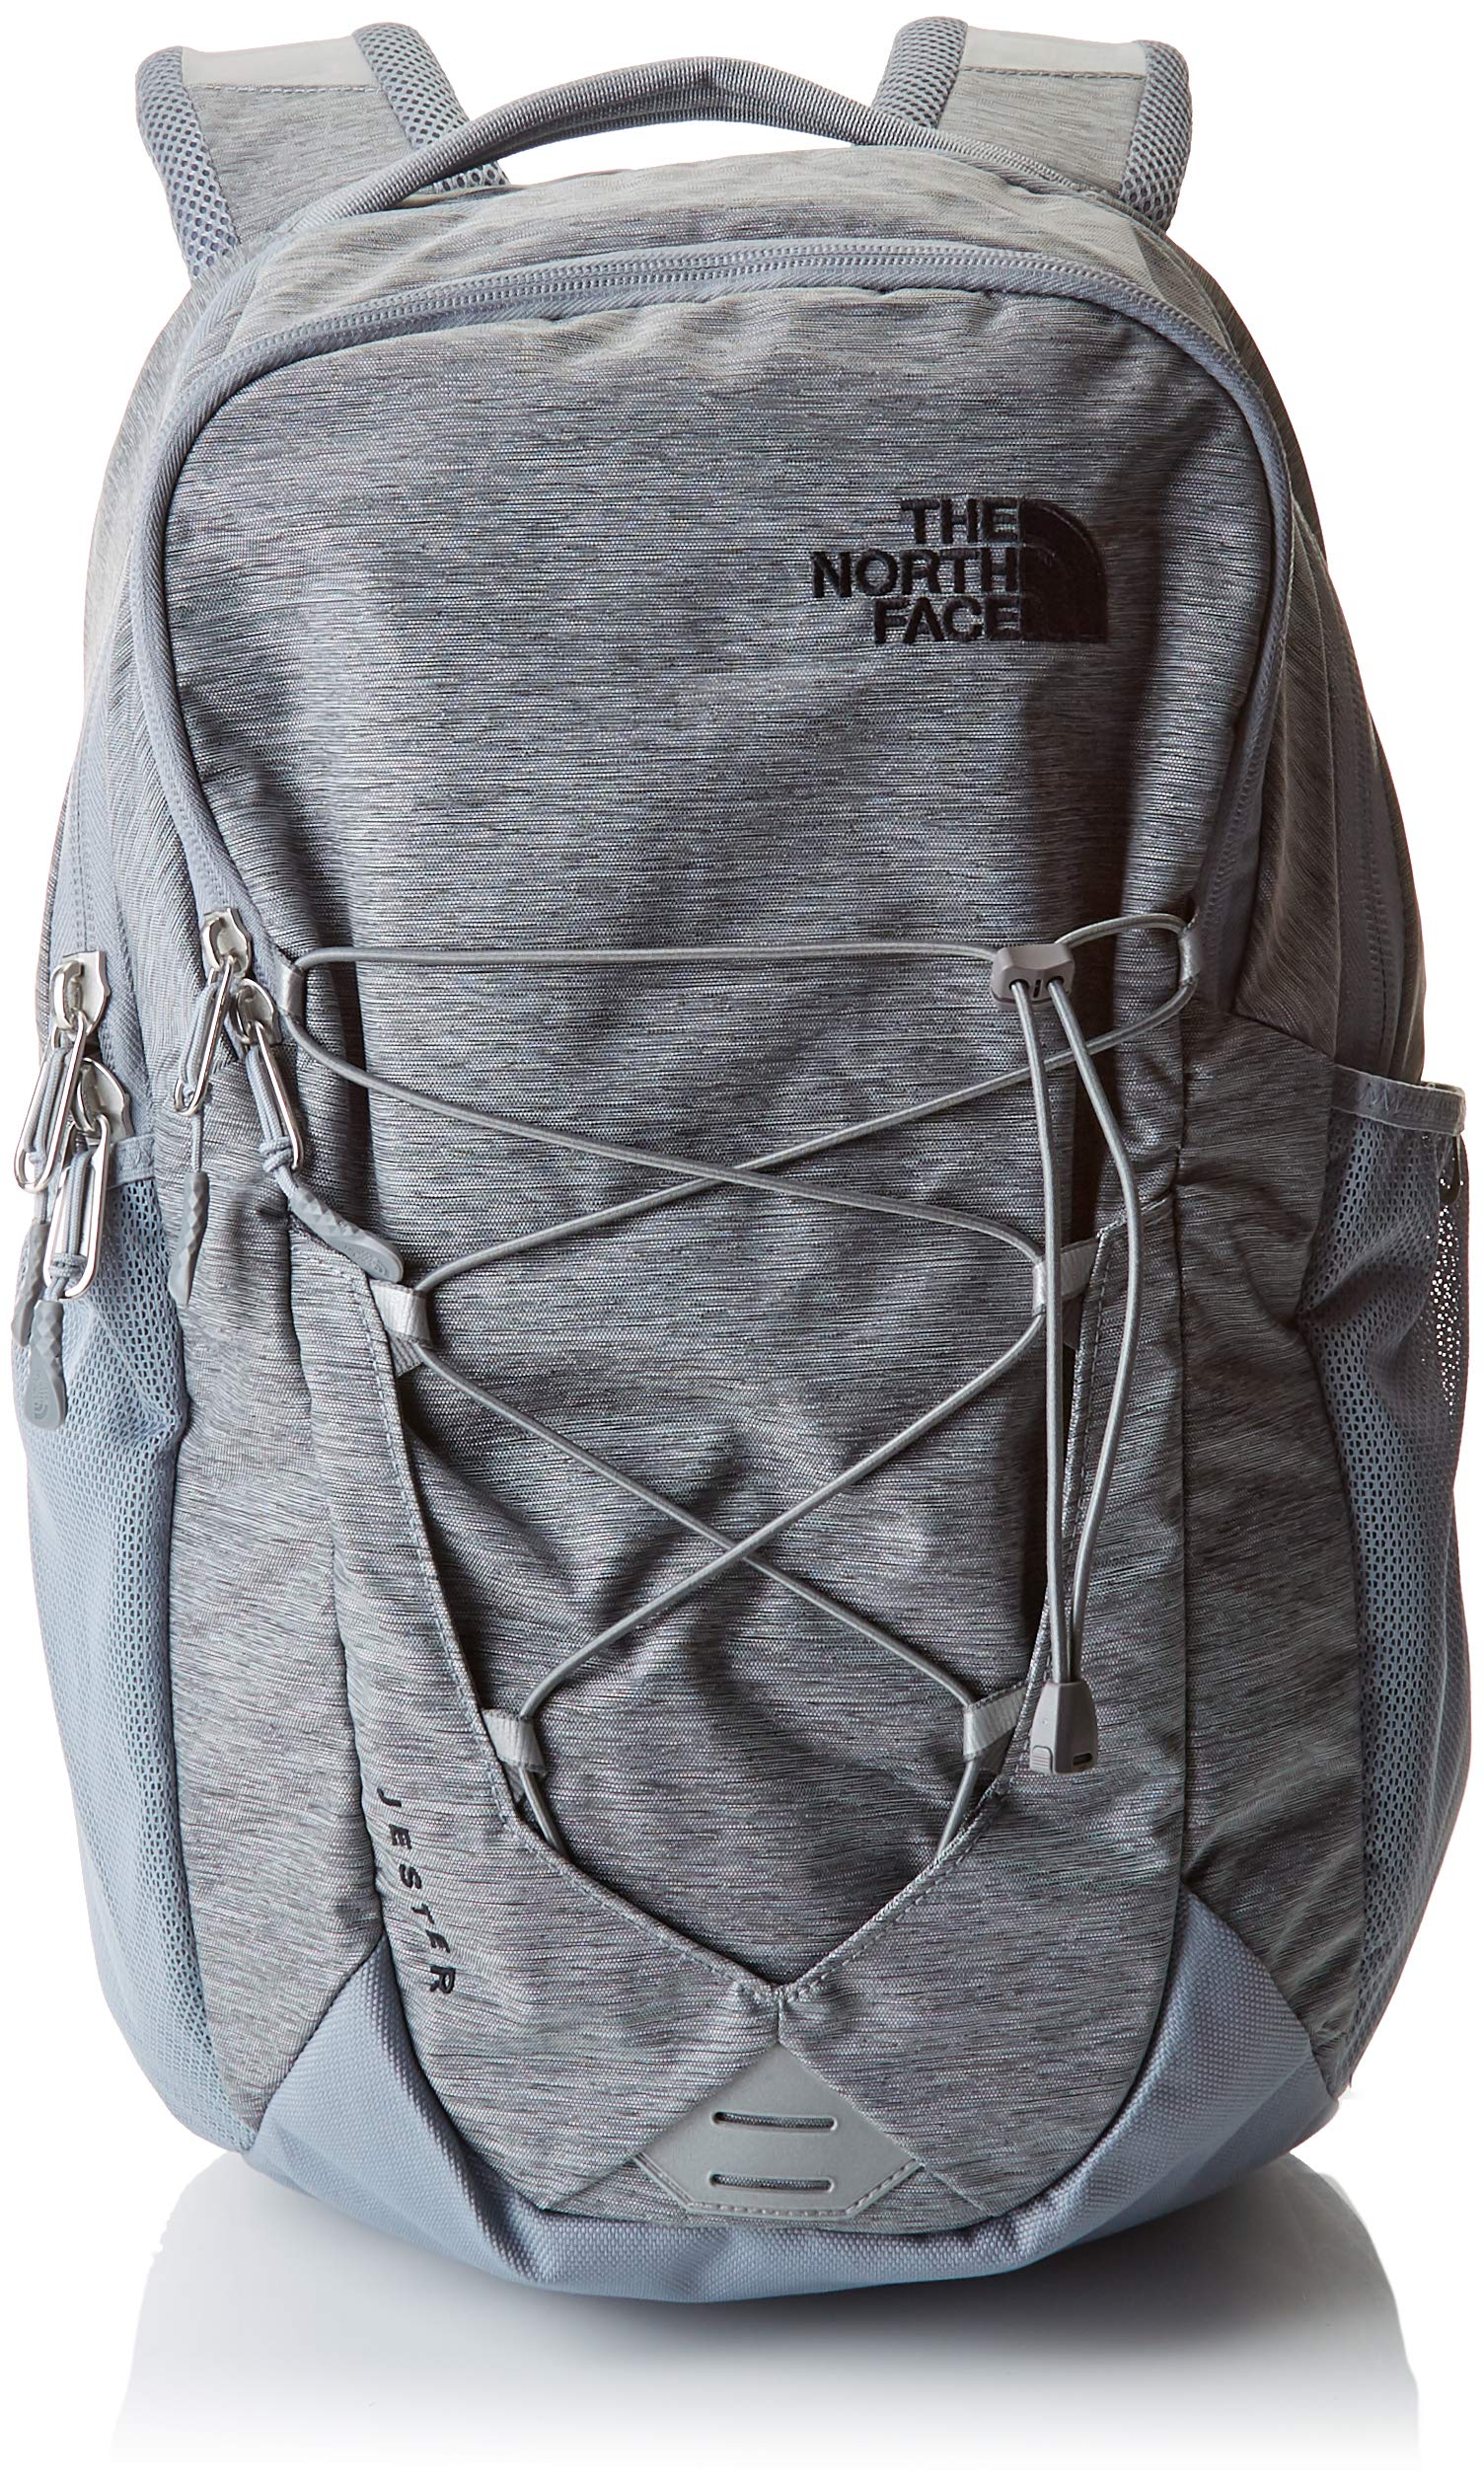 The North Face Jester Backpack, Mid Grey Dark Heather/TNF Black, One Size